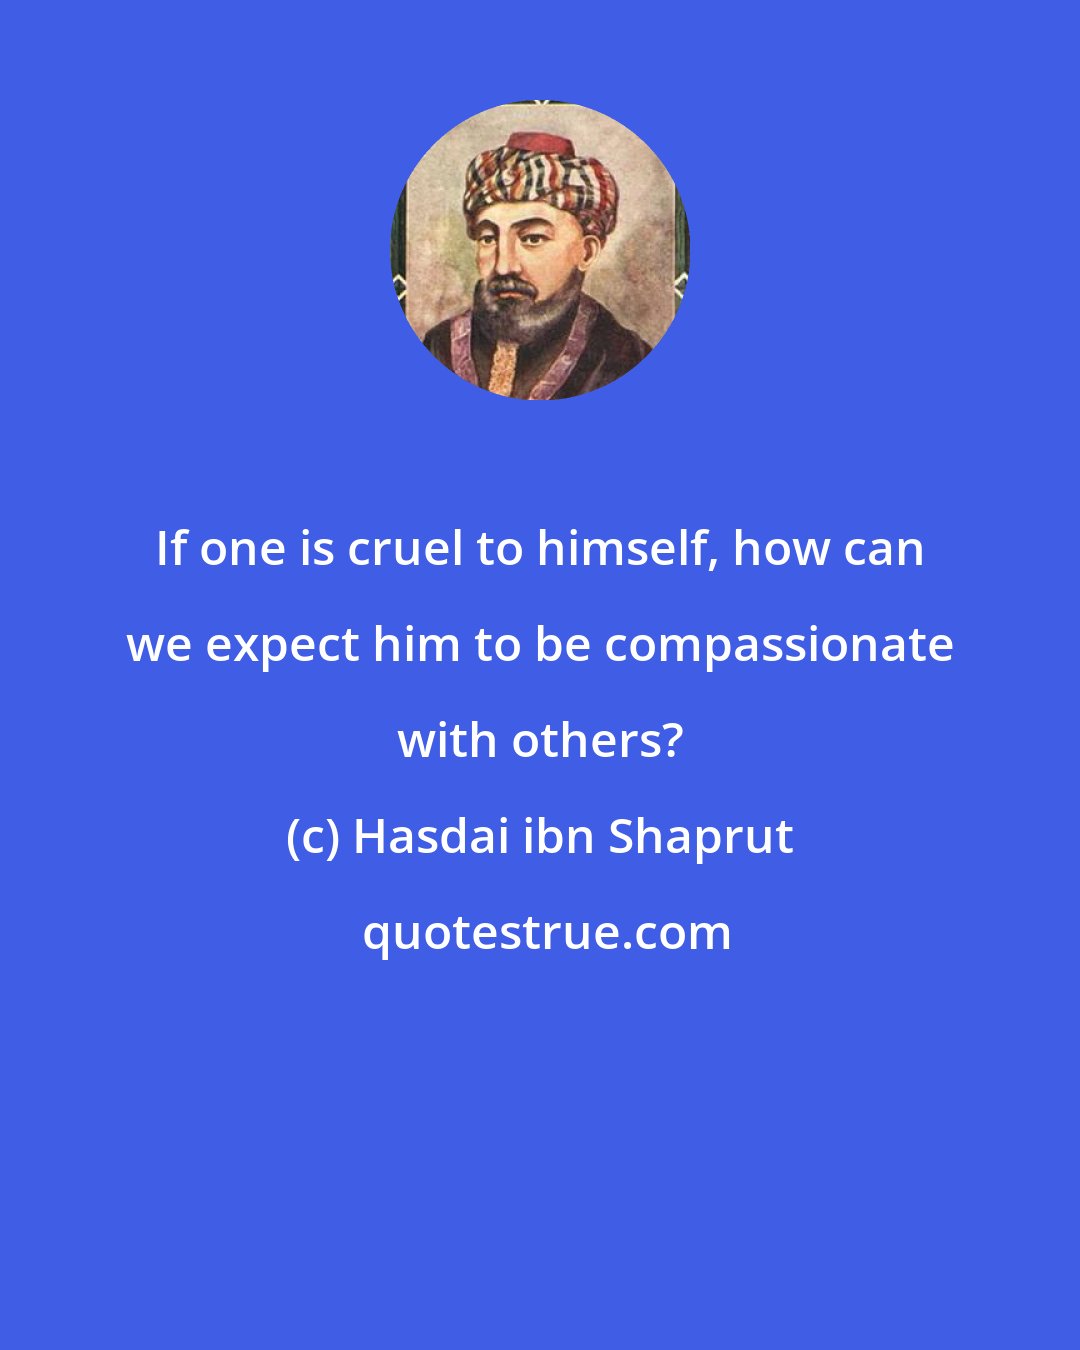 Hasdai ibn Shaprut: If one is cruel to himself, how can we expect him to be compassionate with others?